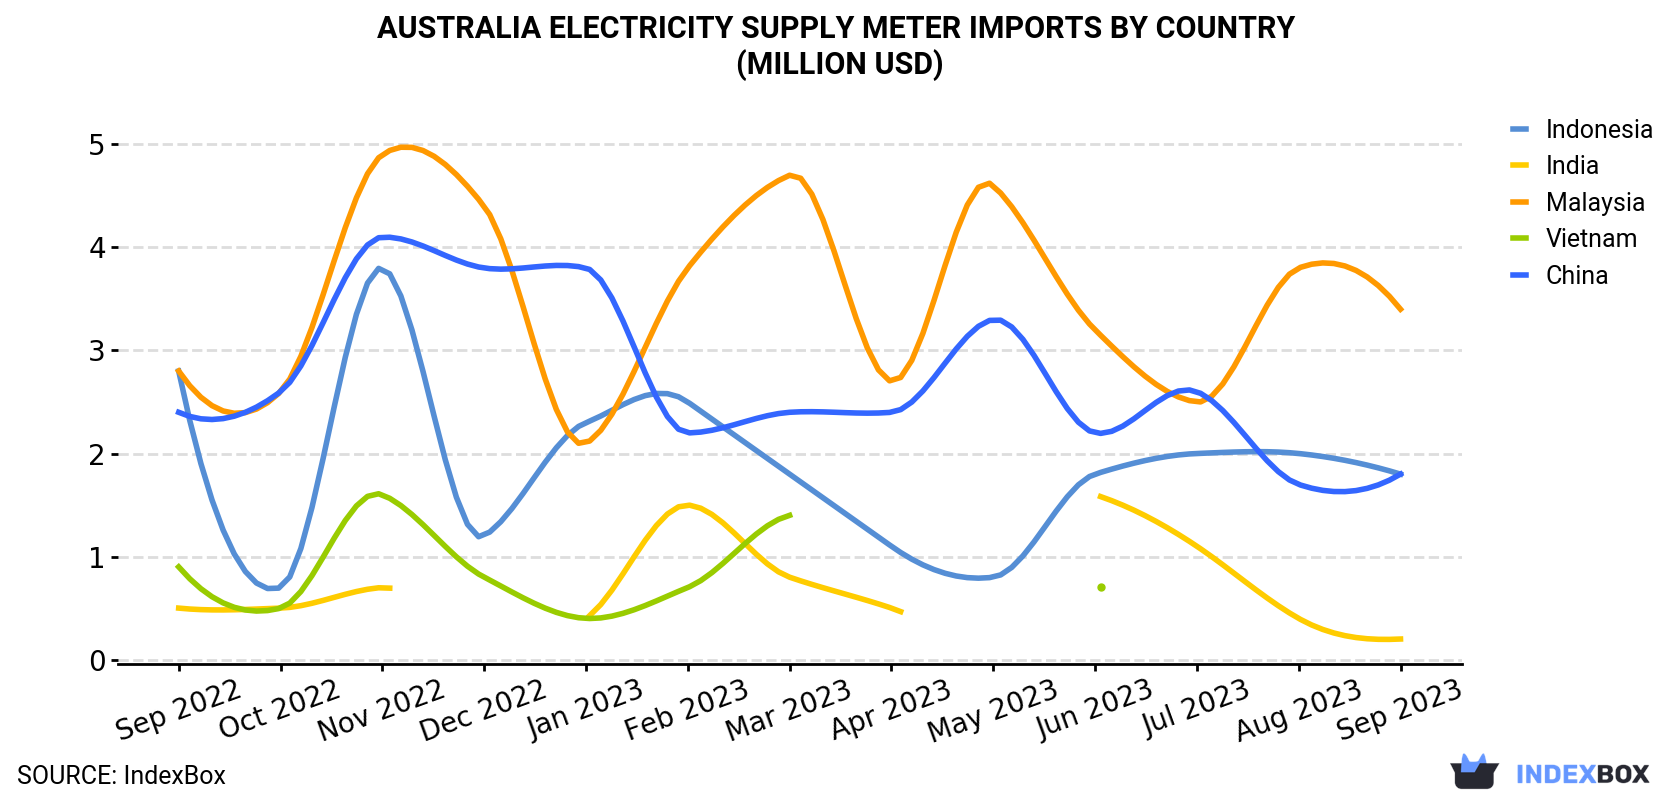 Australia Electricity Supply Meter Imports By Country (Million USD)